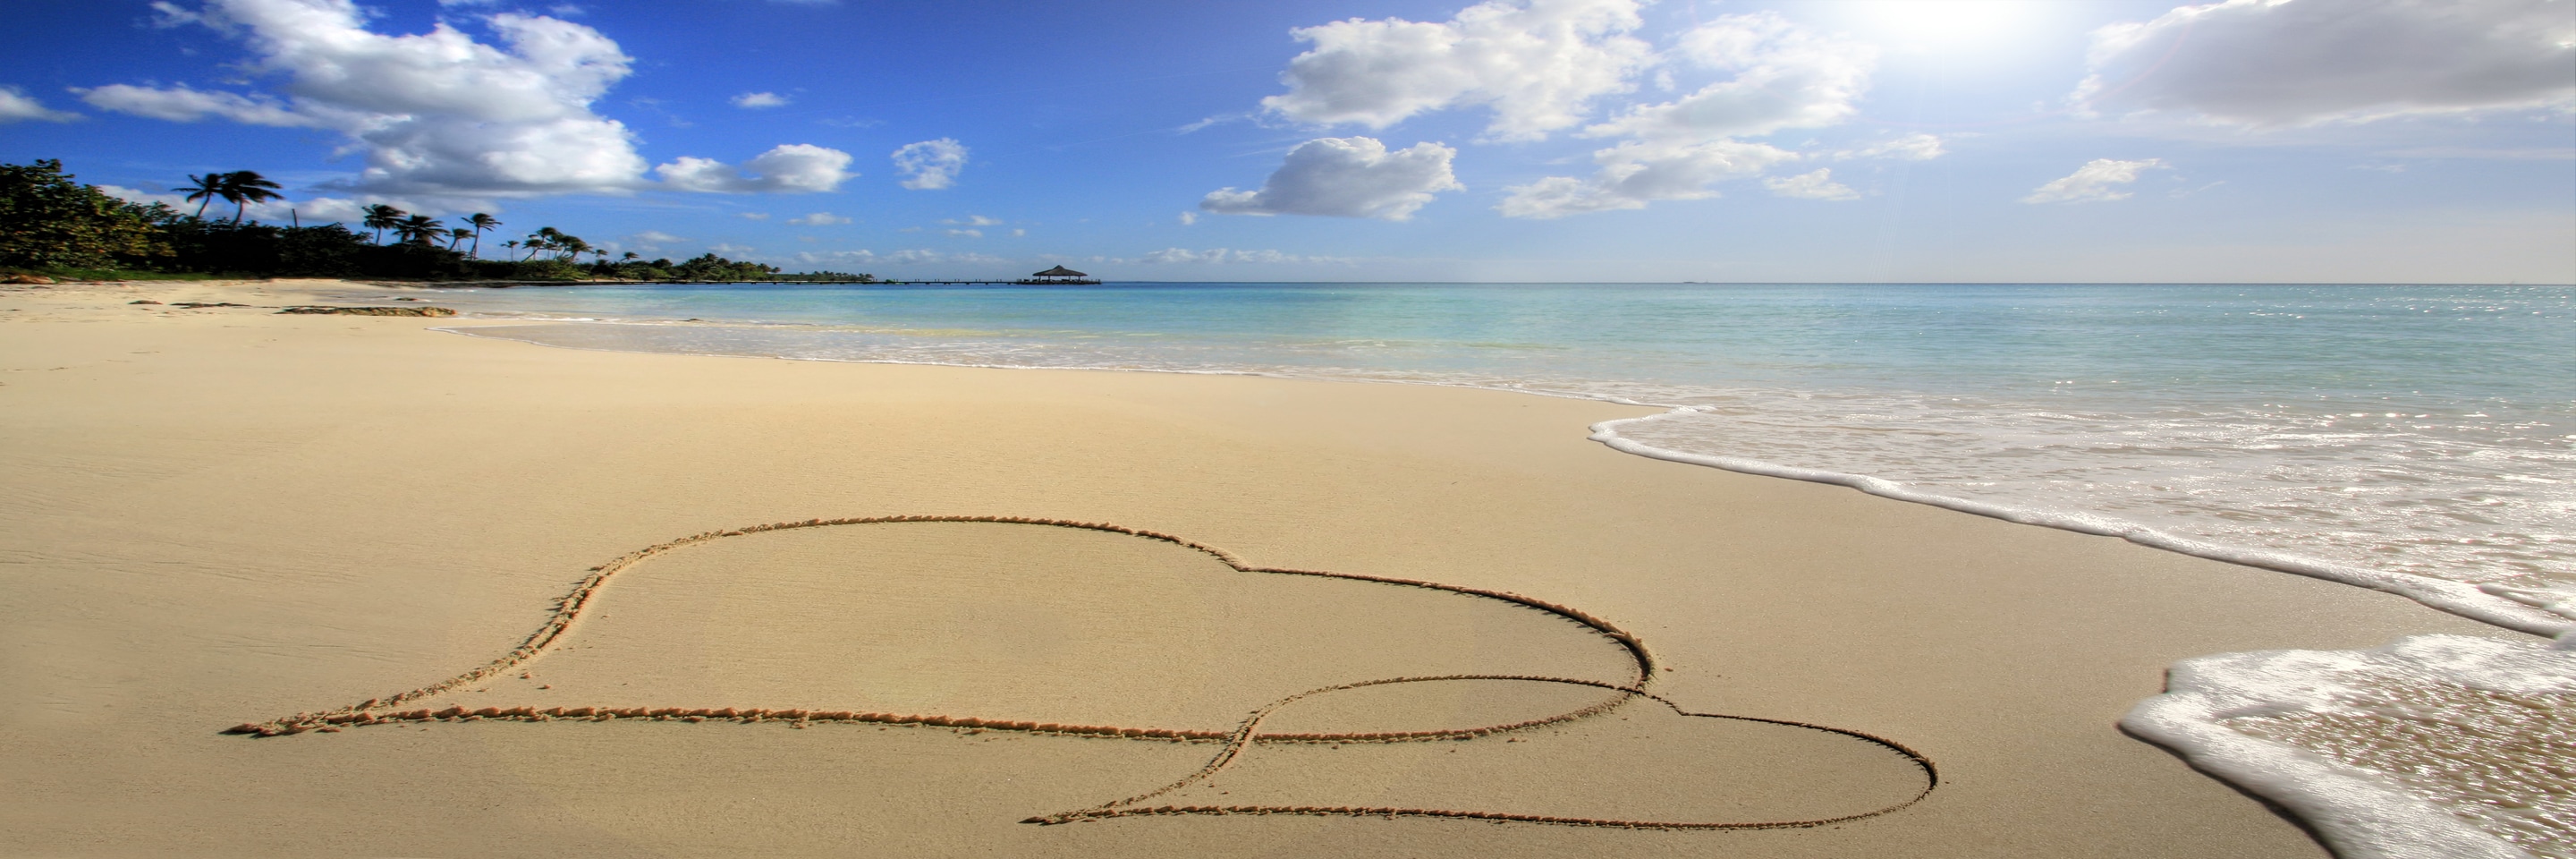 Two hearts drawn in the sand, on a deserted tropical beach with lapping waves.